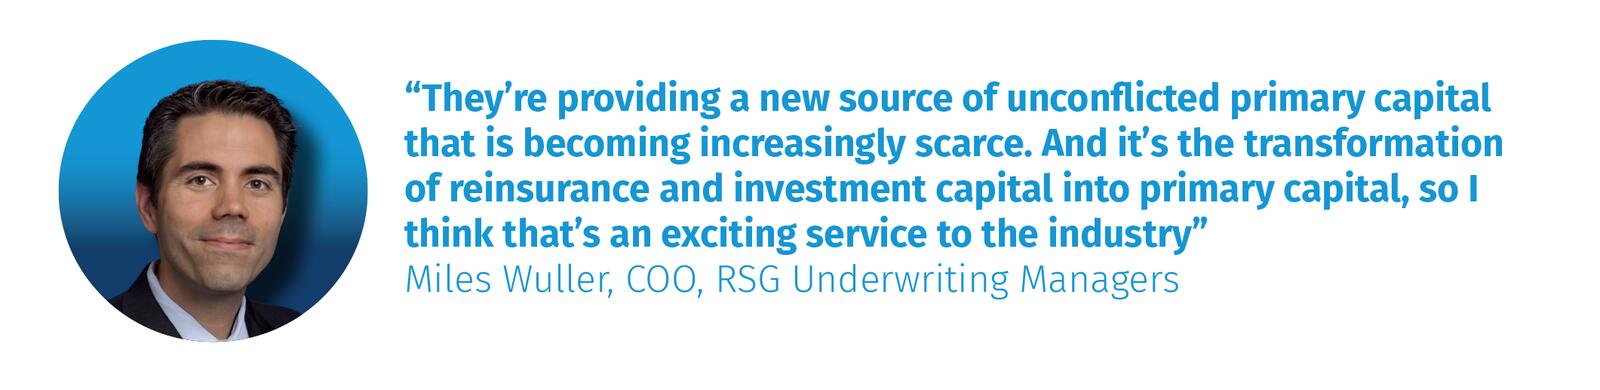 Miles Wuller, COO, RSG Underwriting Managers